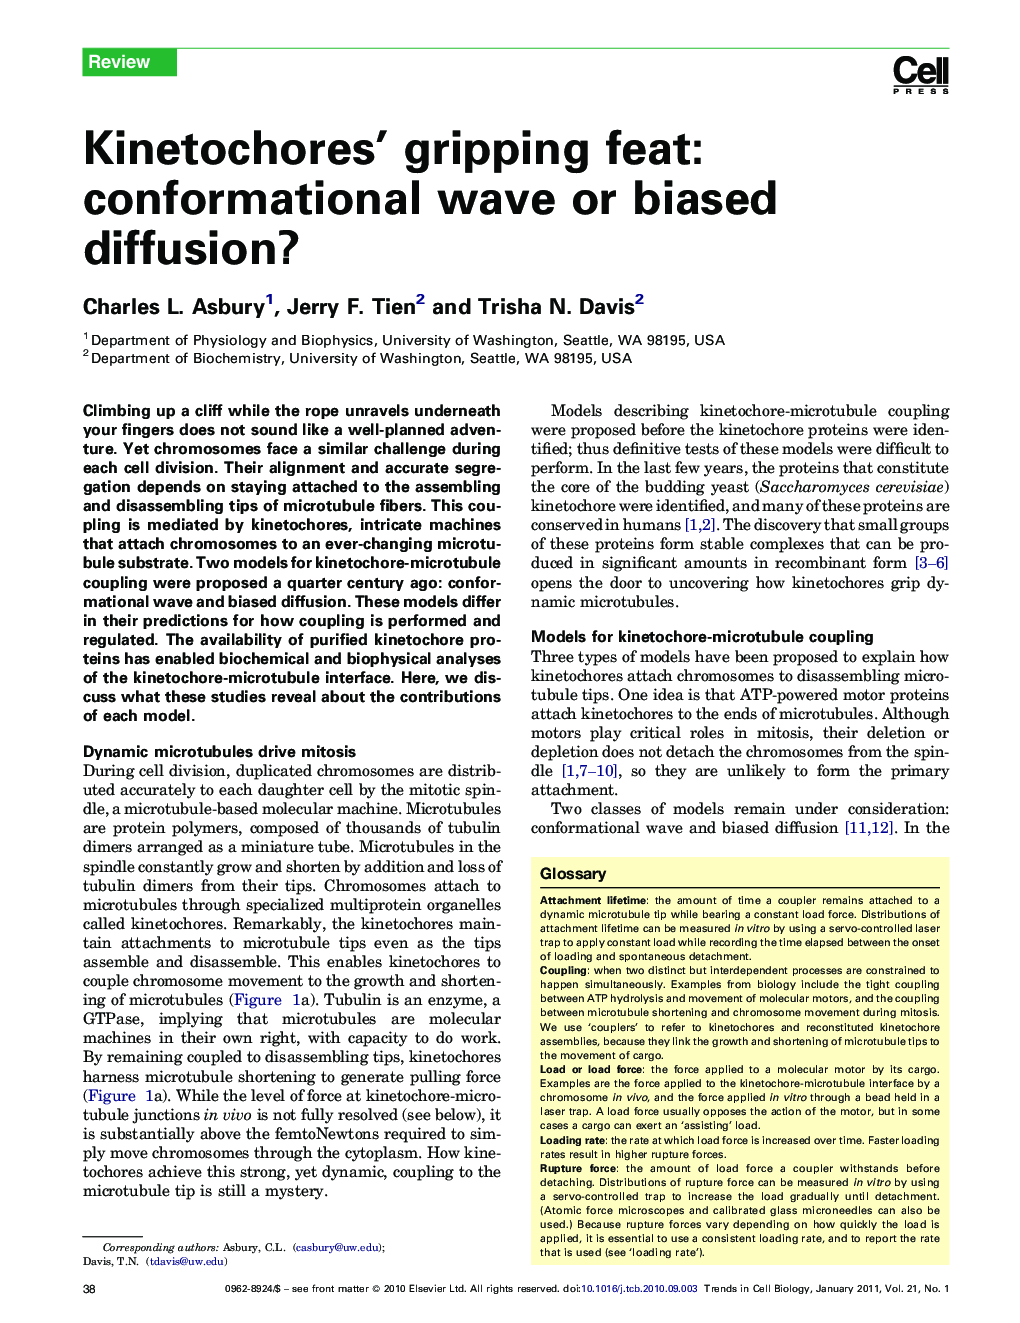 Kinetochores’ gripping feat: conformational wave or biased diffusion?